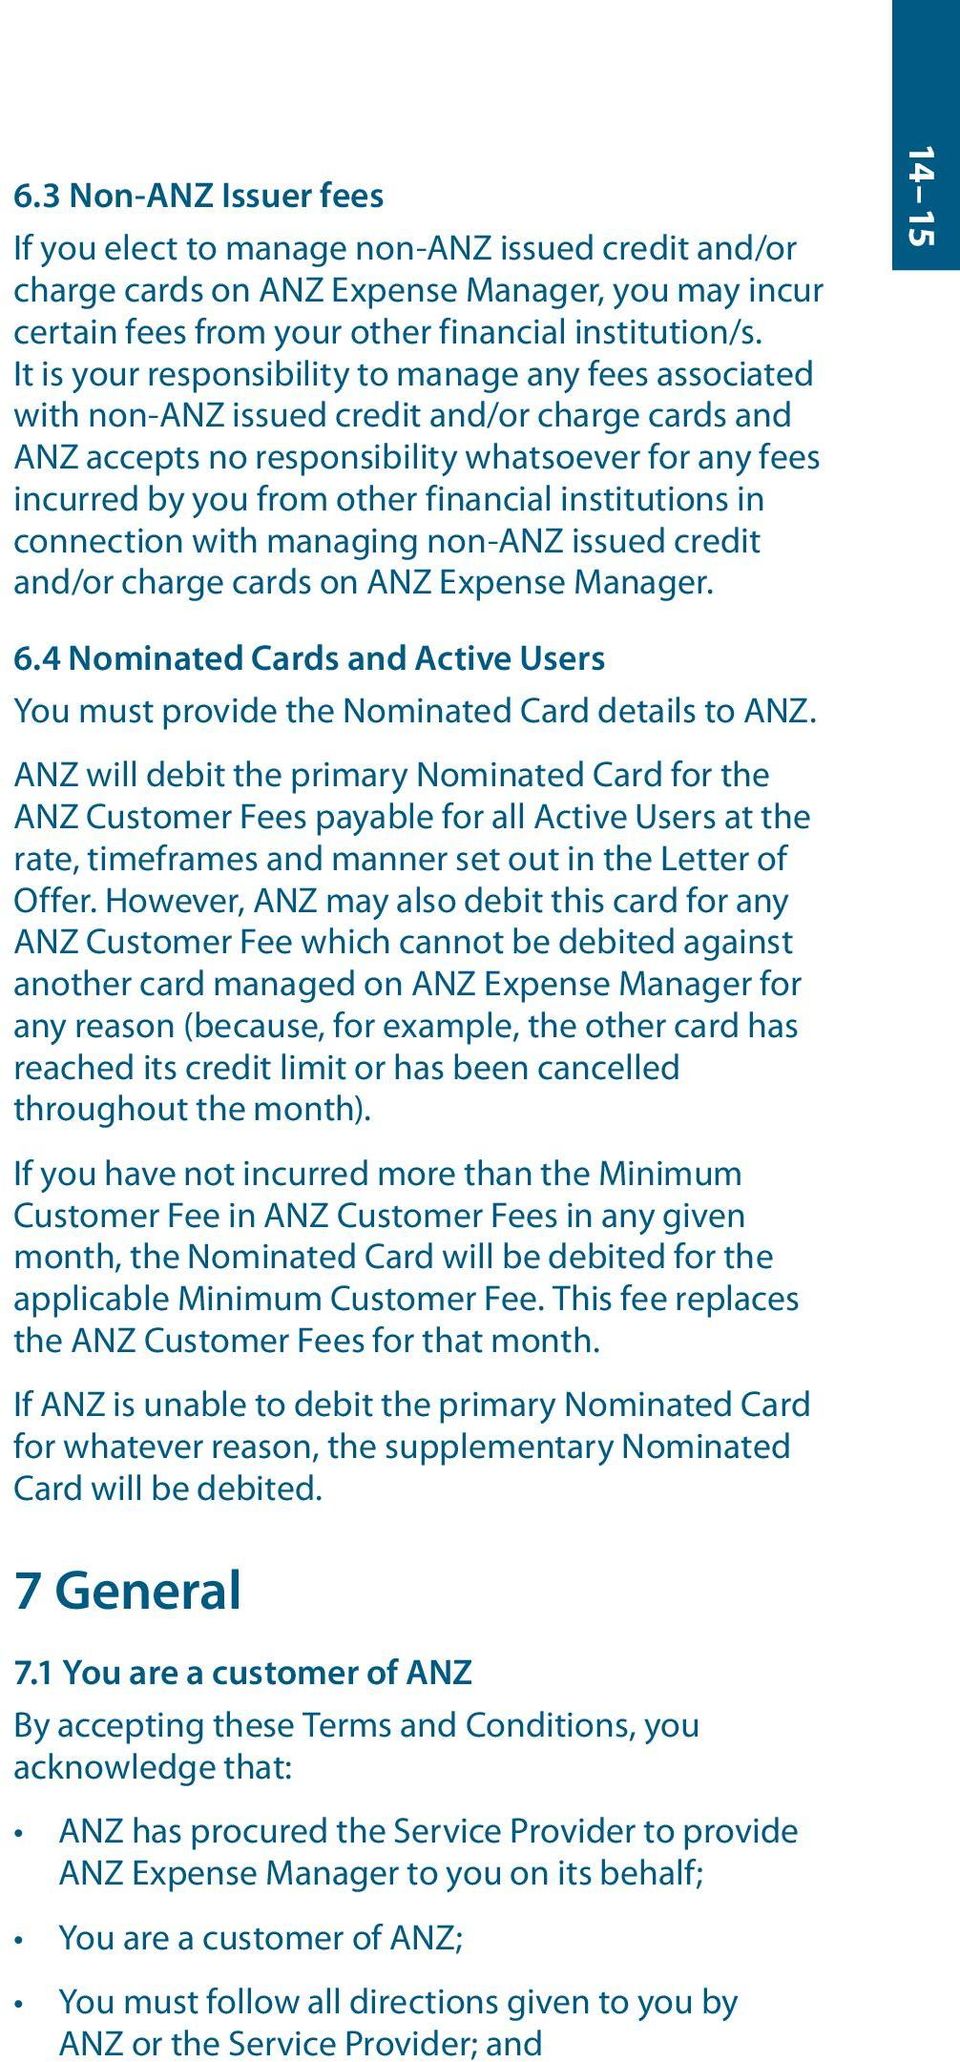 institutions in connection with managing non-anz issued credit and/or charge cards on ANZ Expense Manager. 14 15 6.